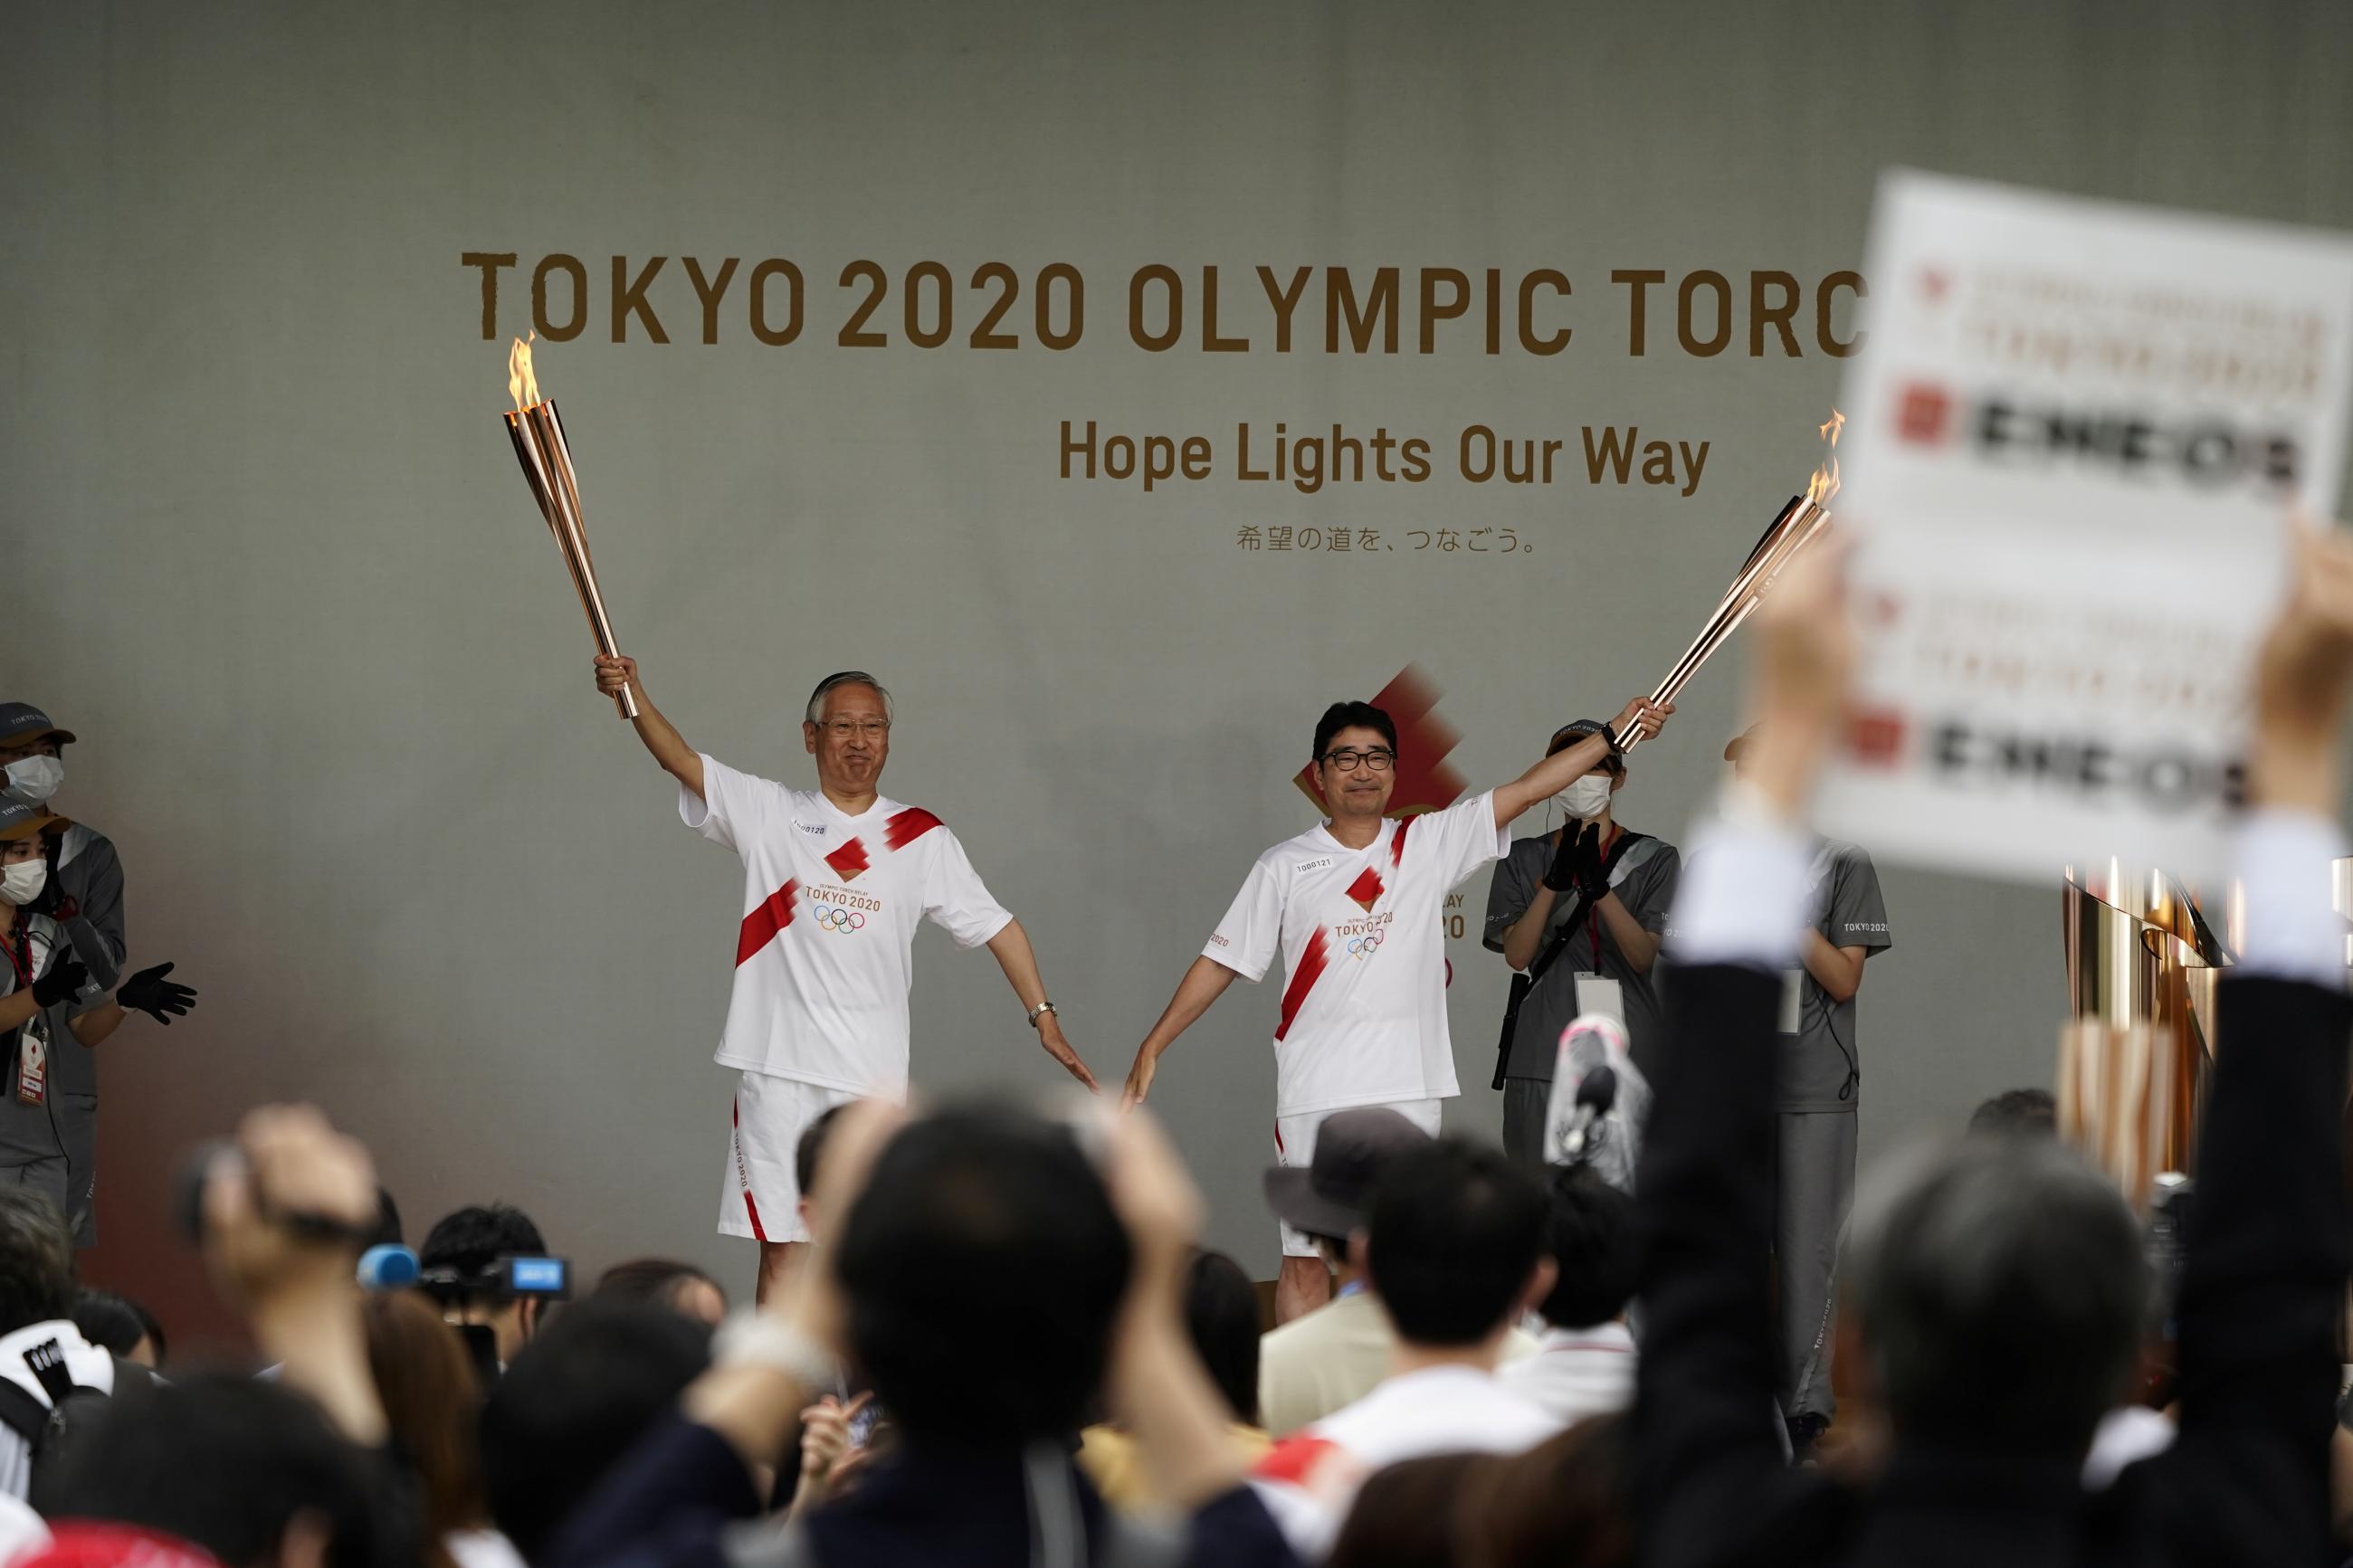 Tokyo's torchbearers pose during a lighting ceremony after their relay on a public road was canceled due to the COVID pandemic, at the Tokyo 2020 Olympics in Japan on July 9, 2021.